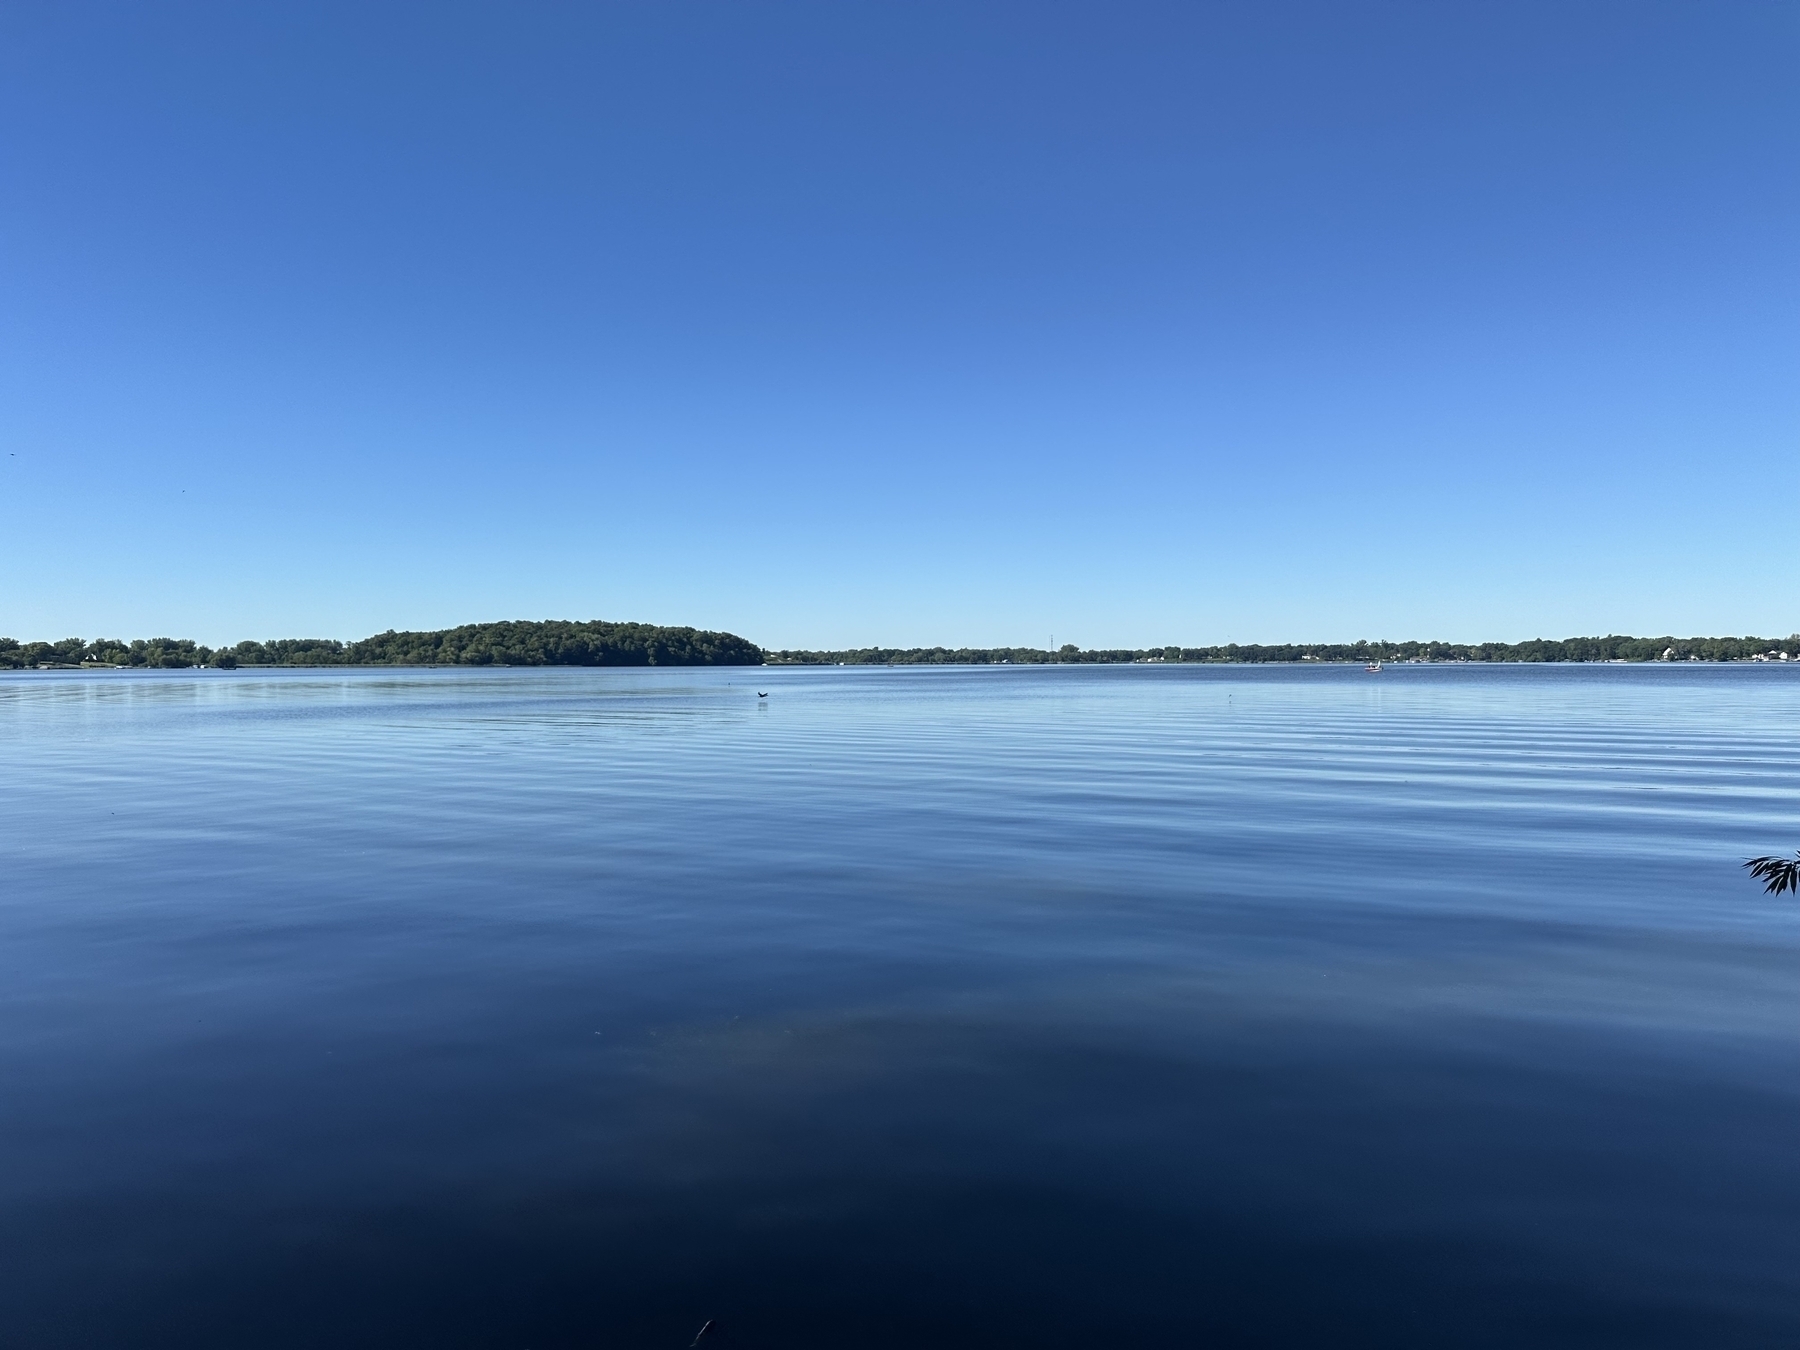 Calm water reflecting clear blue sky with a distant tree-lined shore across the horizon